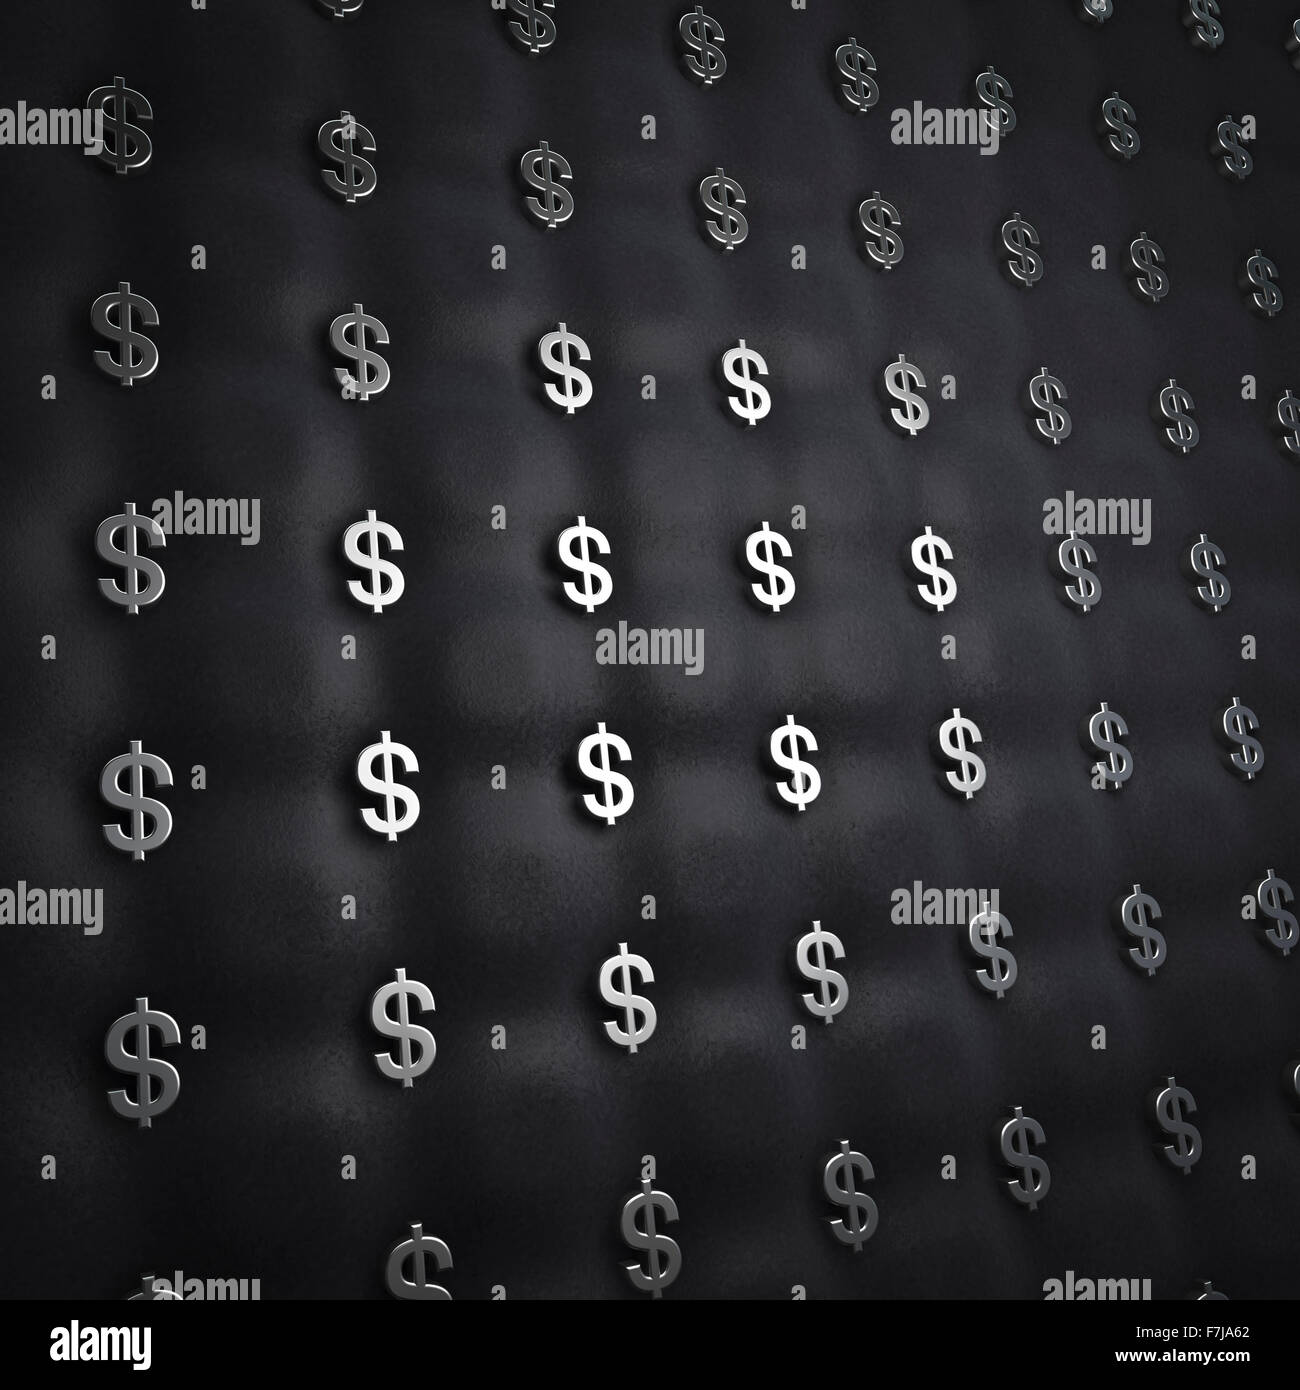 Luxury dollar silver background / 3D render of leather upholstery with dollar symbols for buttons Stock Photo